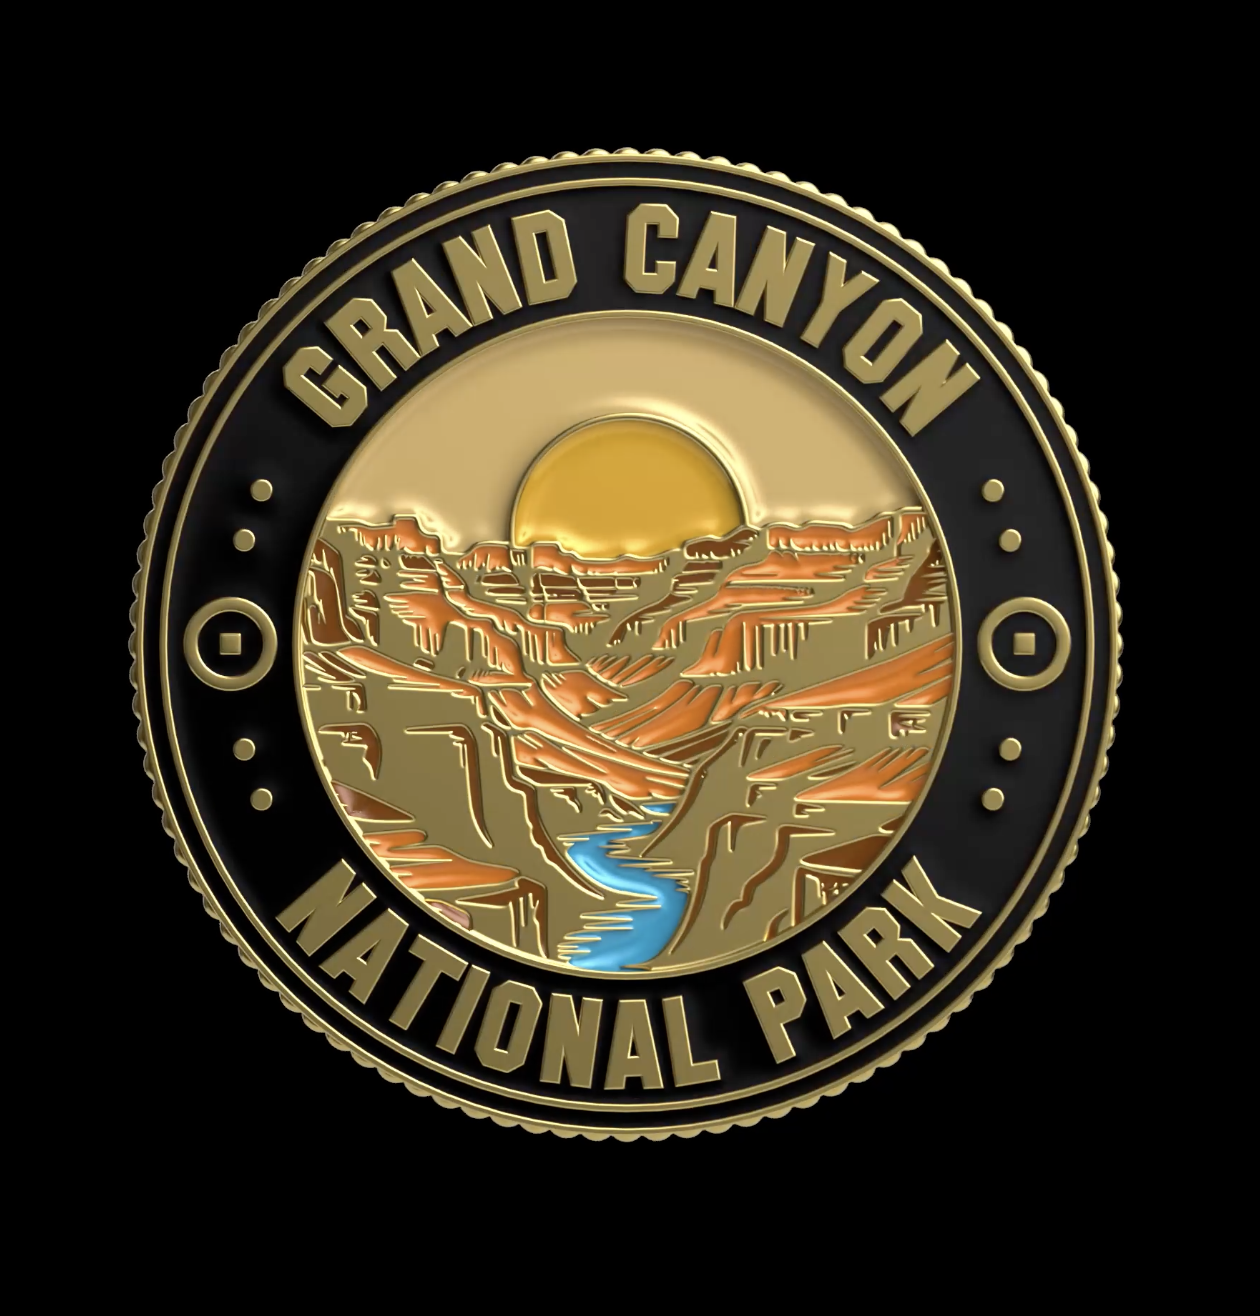 National Parks Commemorative Coin